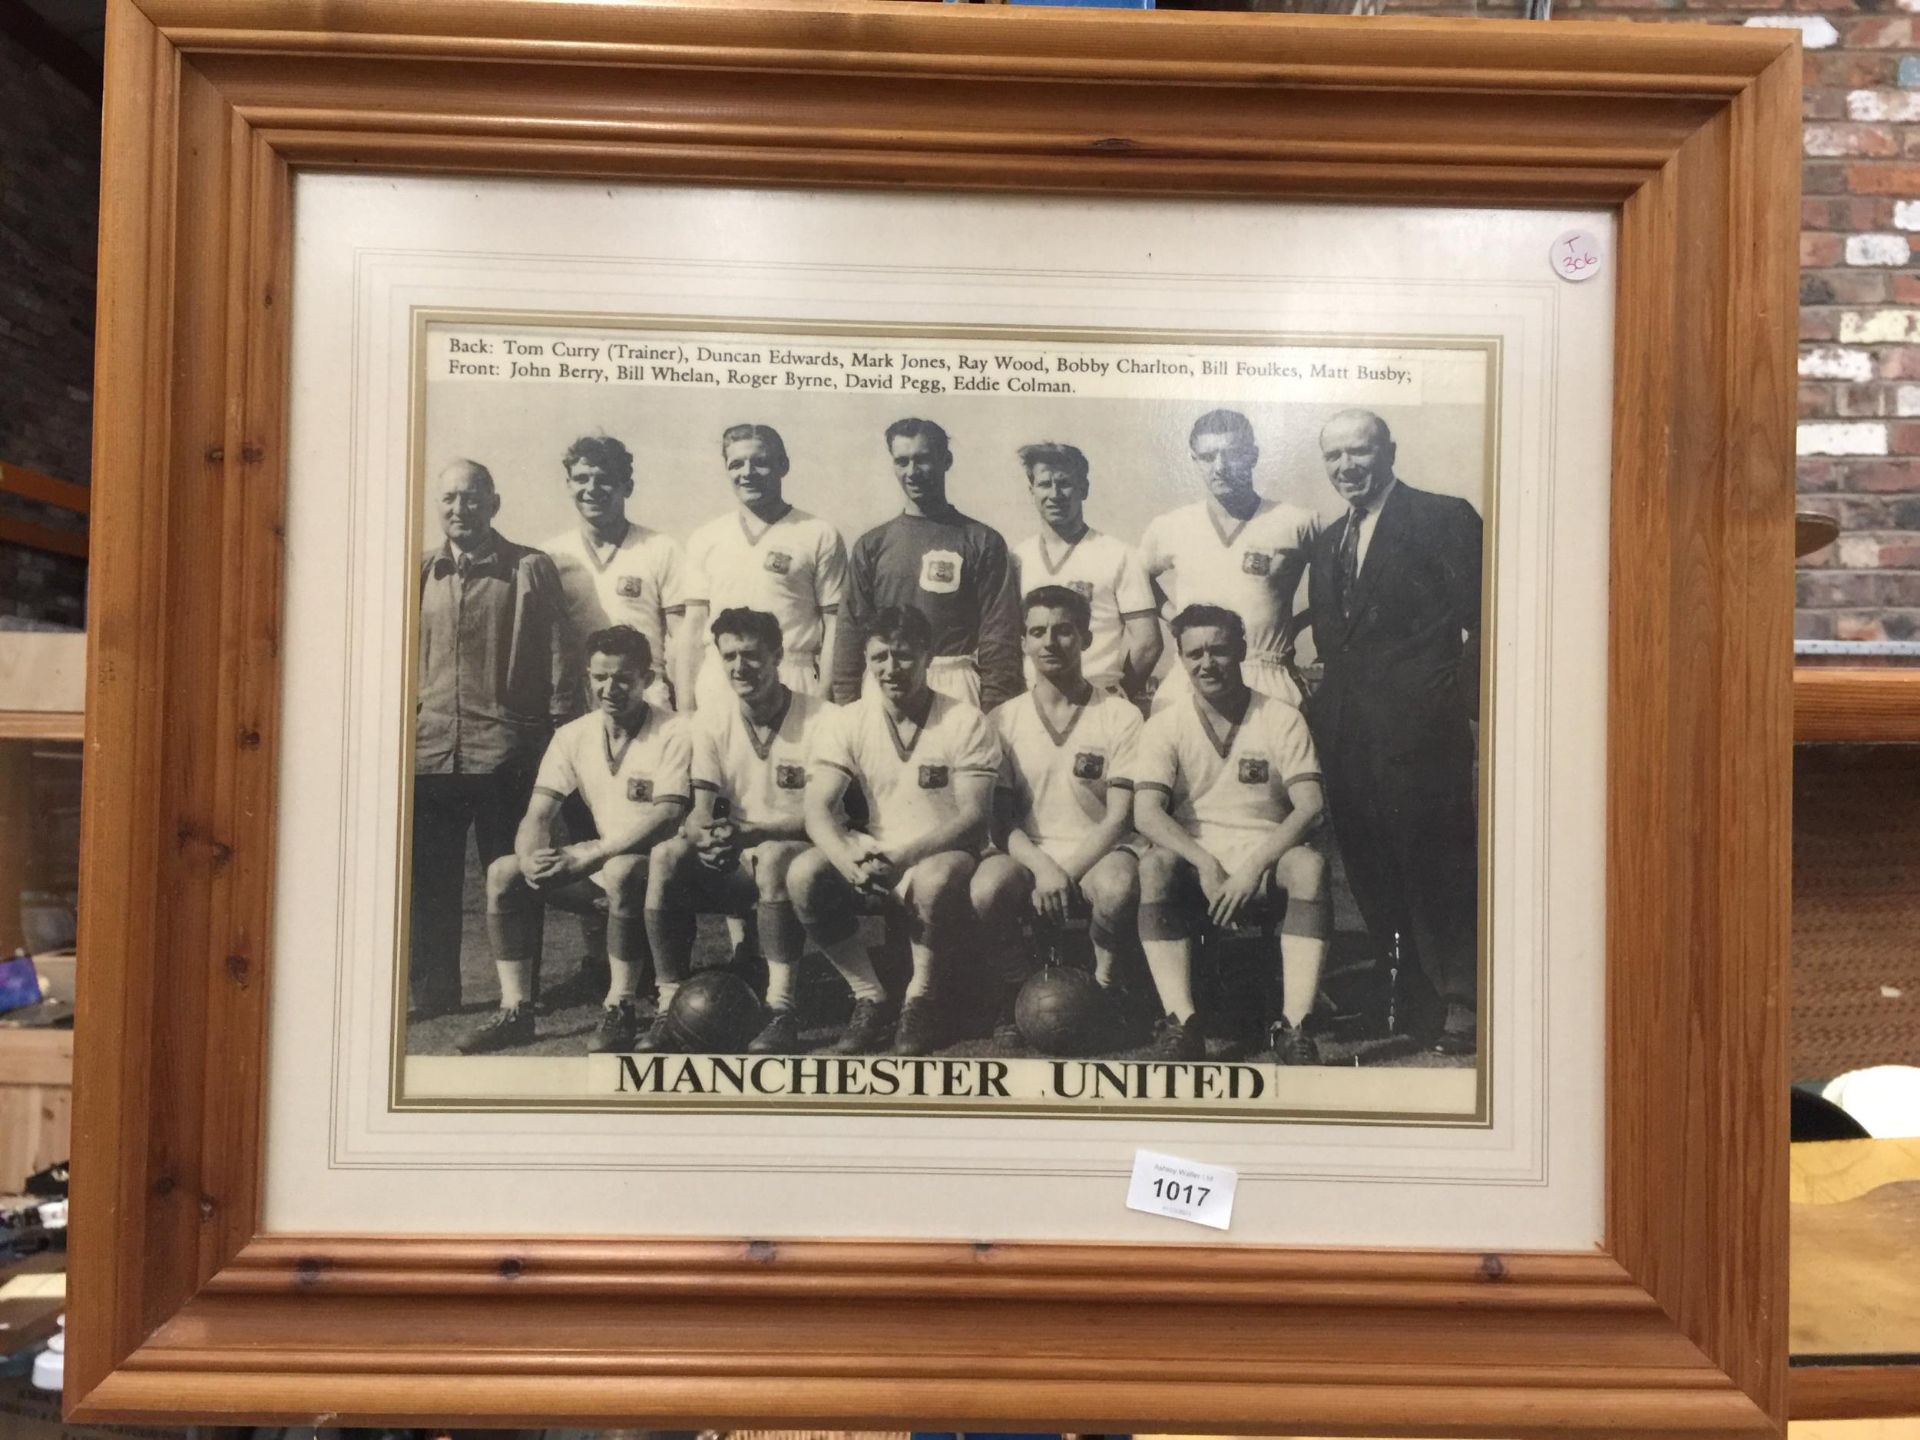 A FRAMED PRINT OF MANCHESTER UNITED WITH SIR MATT BUSBY AND THE BUSBY BABES